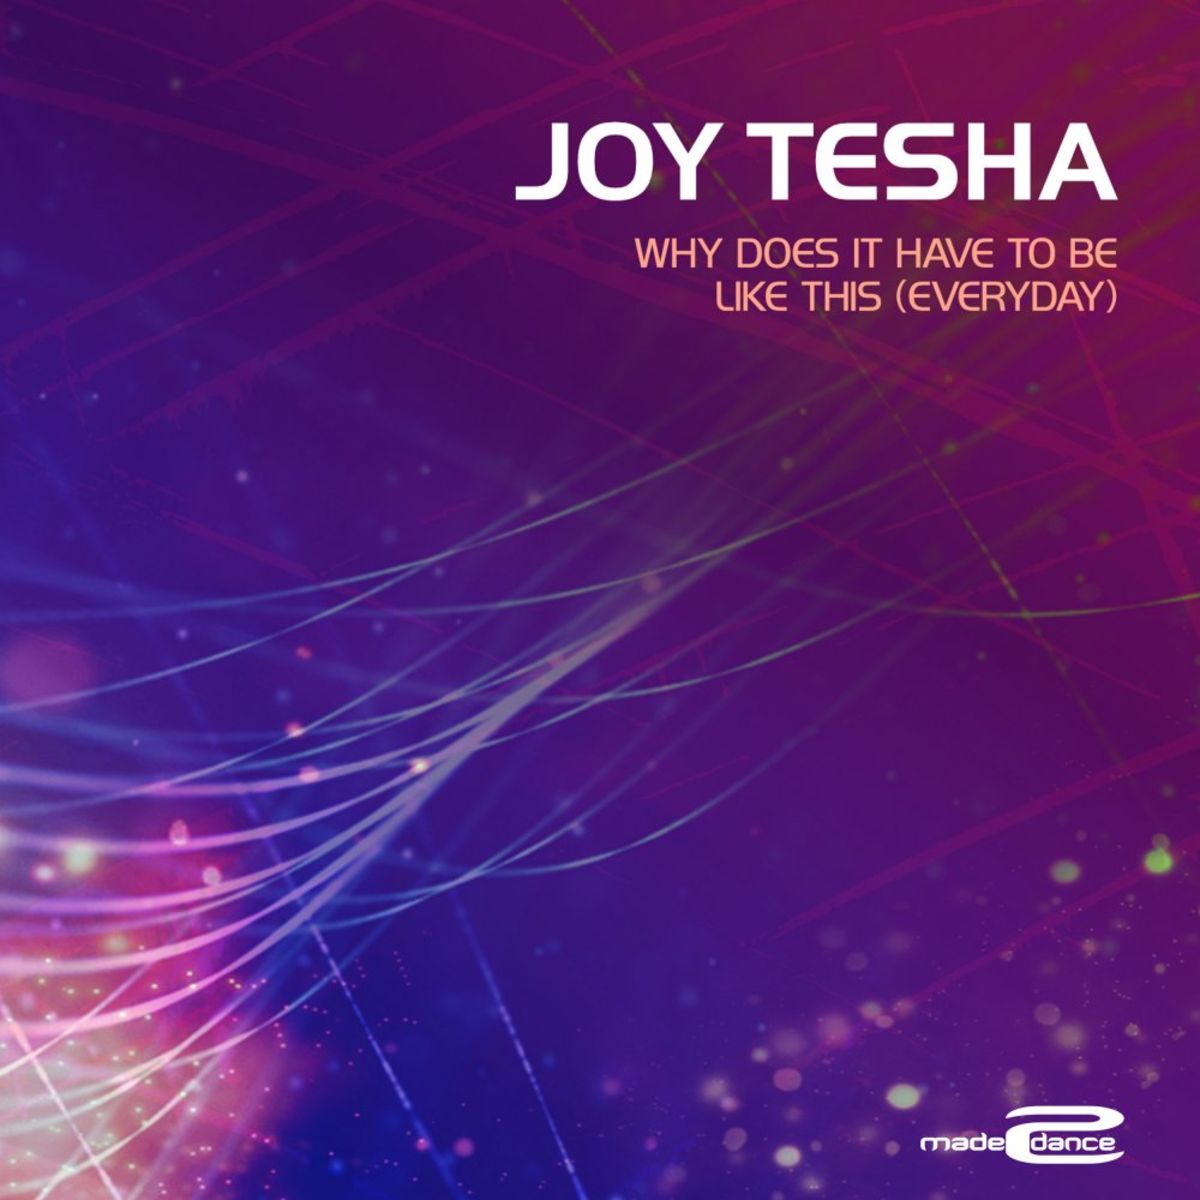 Joy Tesha - Why Does It Have To Be Like This (Everyday) (Soulshaker Remix)